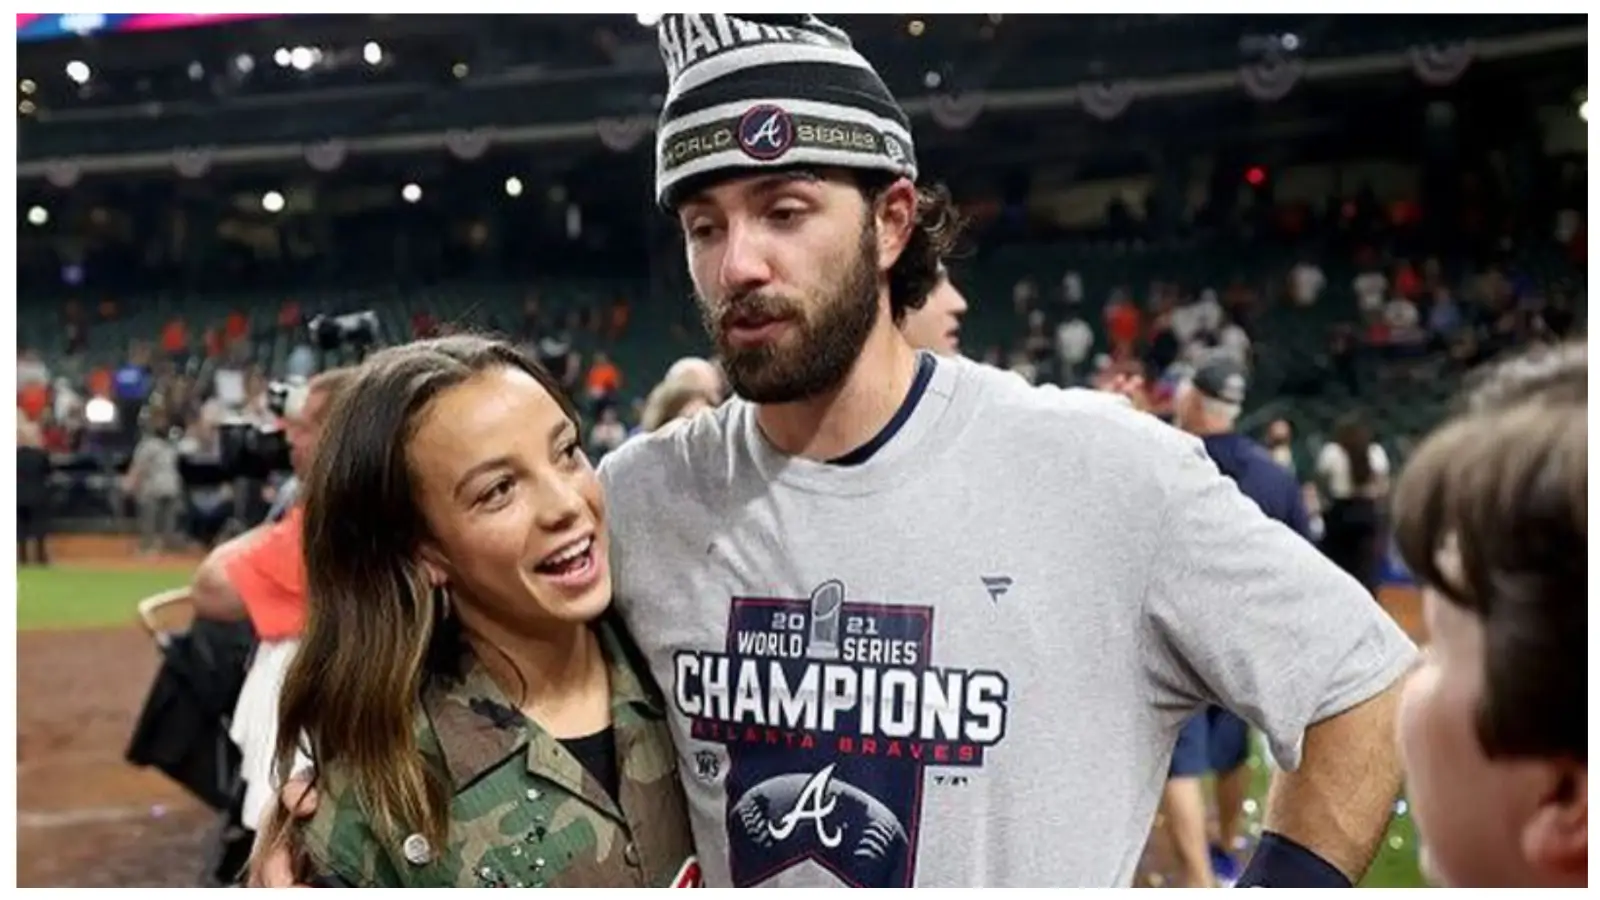 Strongest Woman I've Ever Known” – Husband Dansby Swanson, Megan